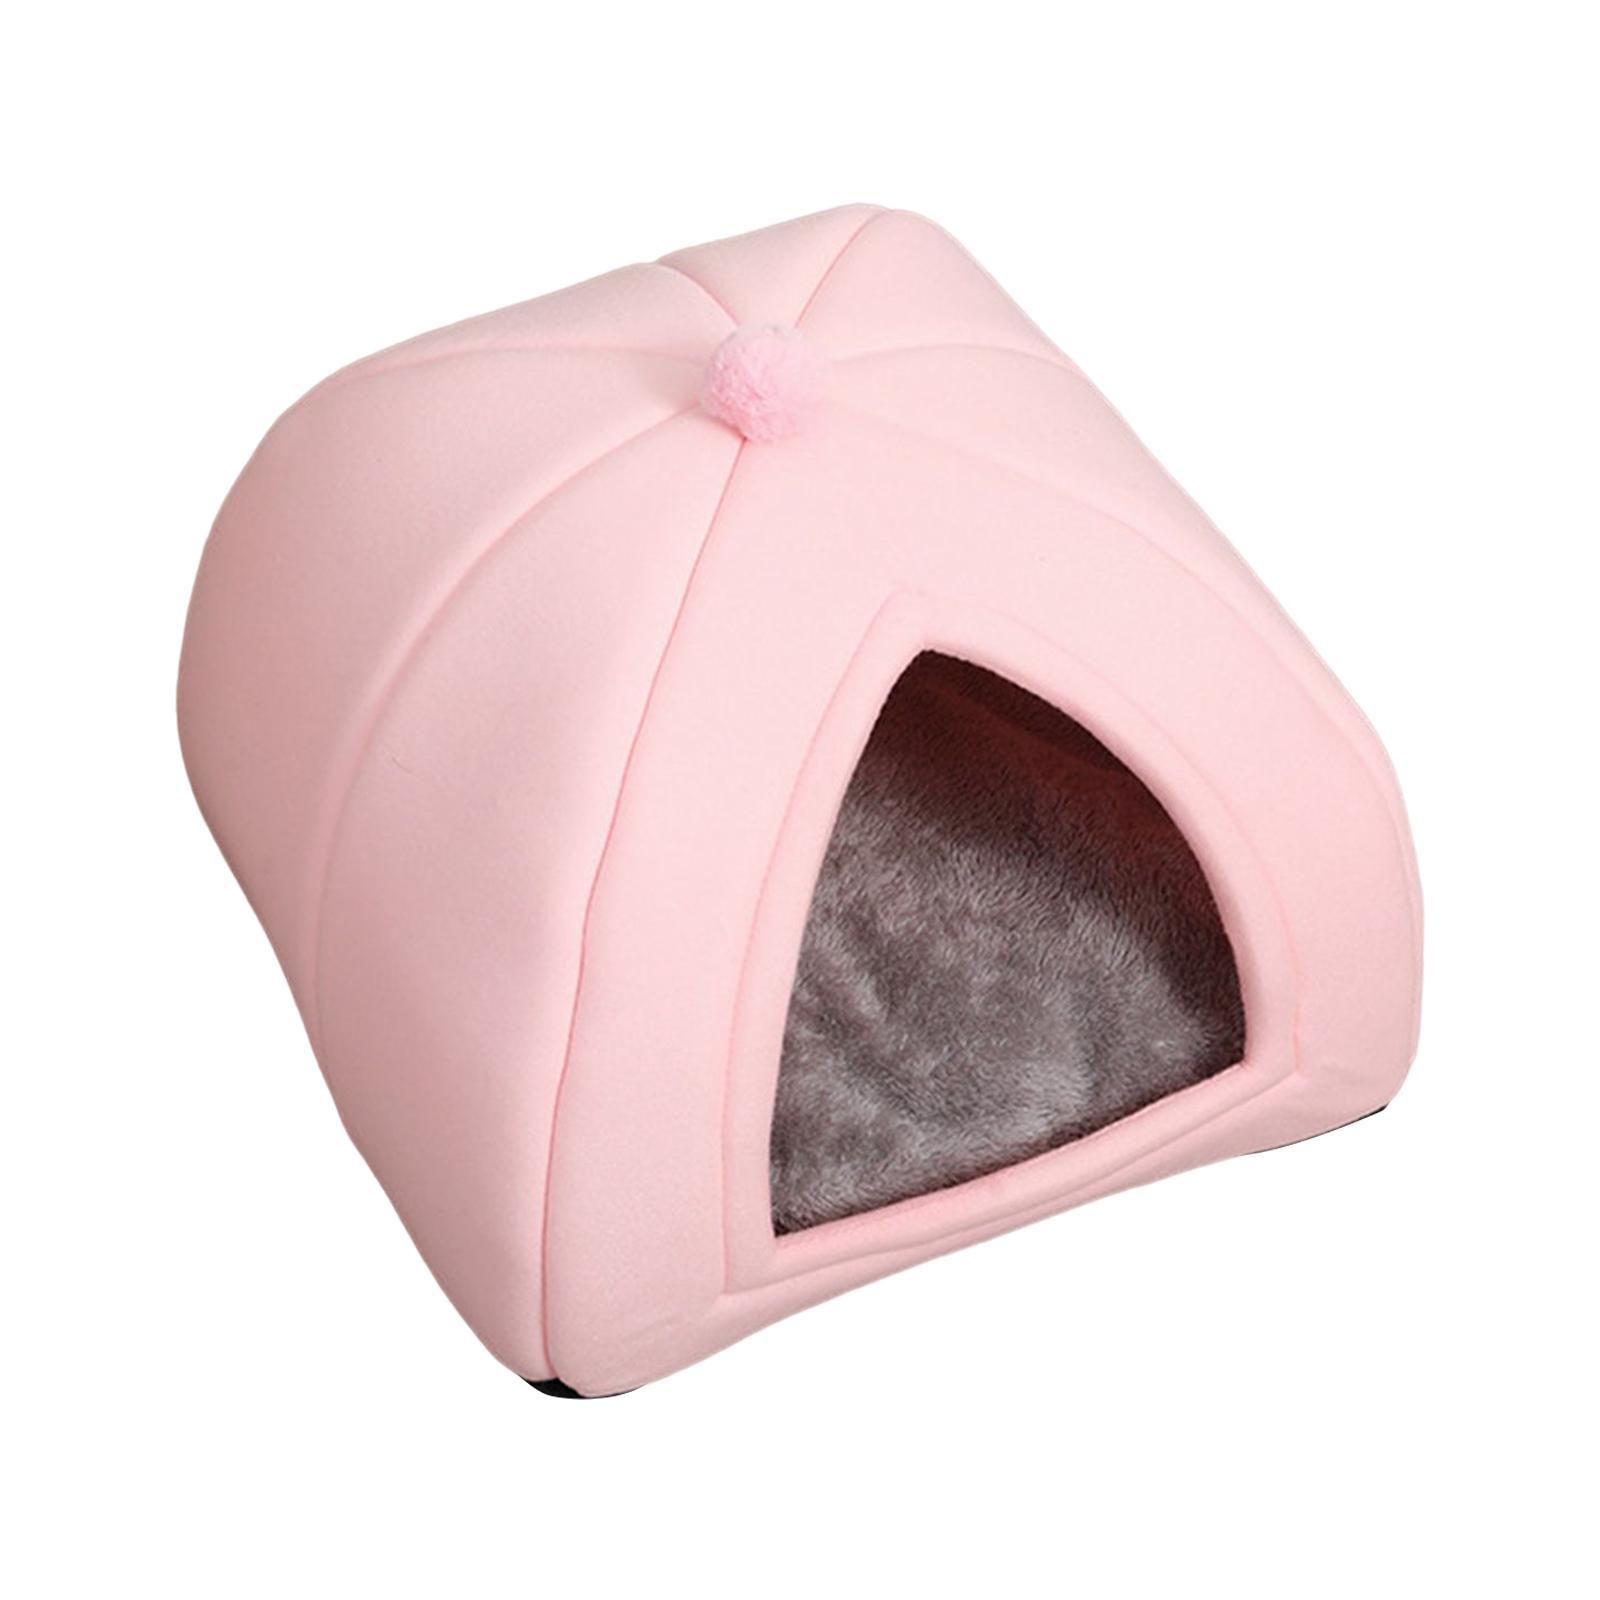 Plush Cave Pet Bed Dog Tent Hut Cozy Removable Washable Pad Cat Warm House for Kitten Sleeping Rabbit